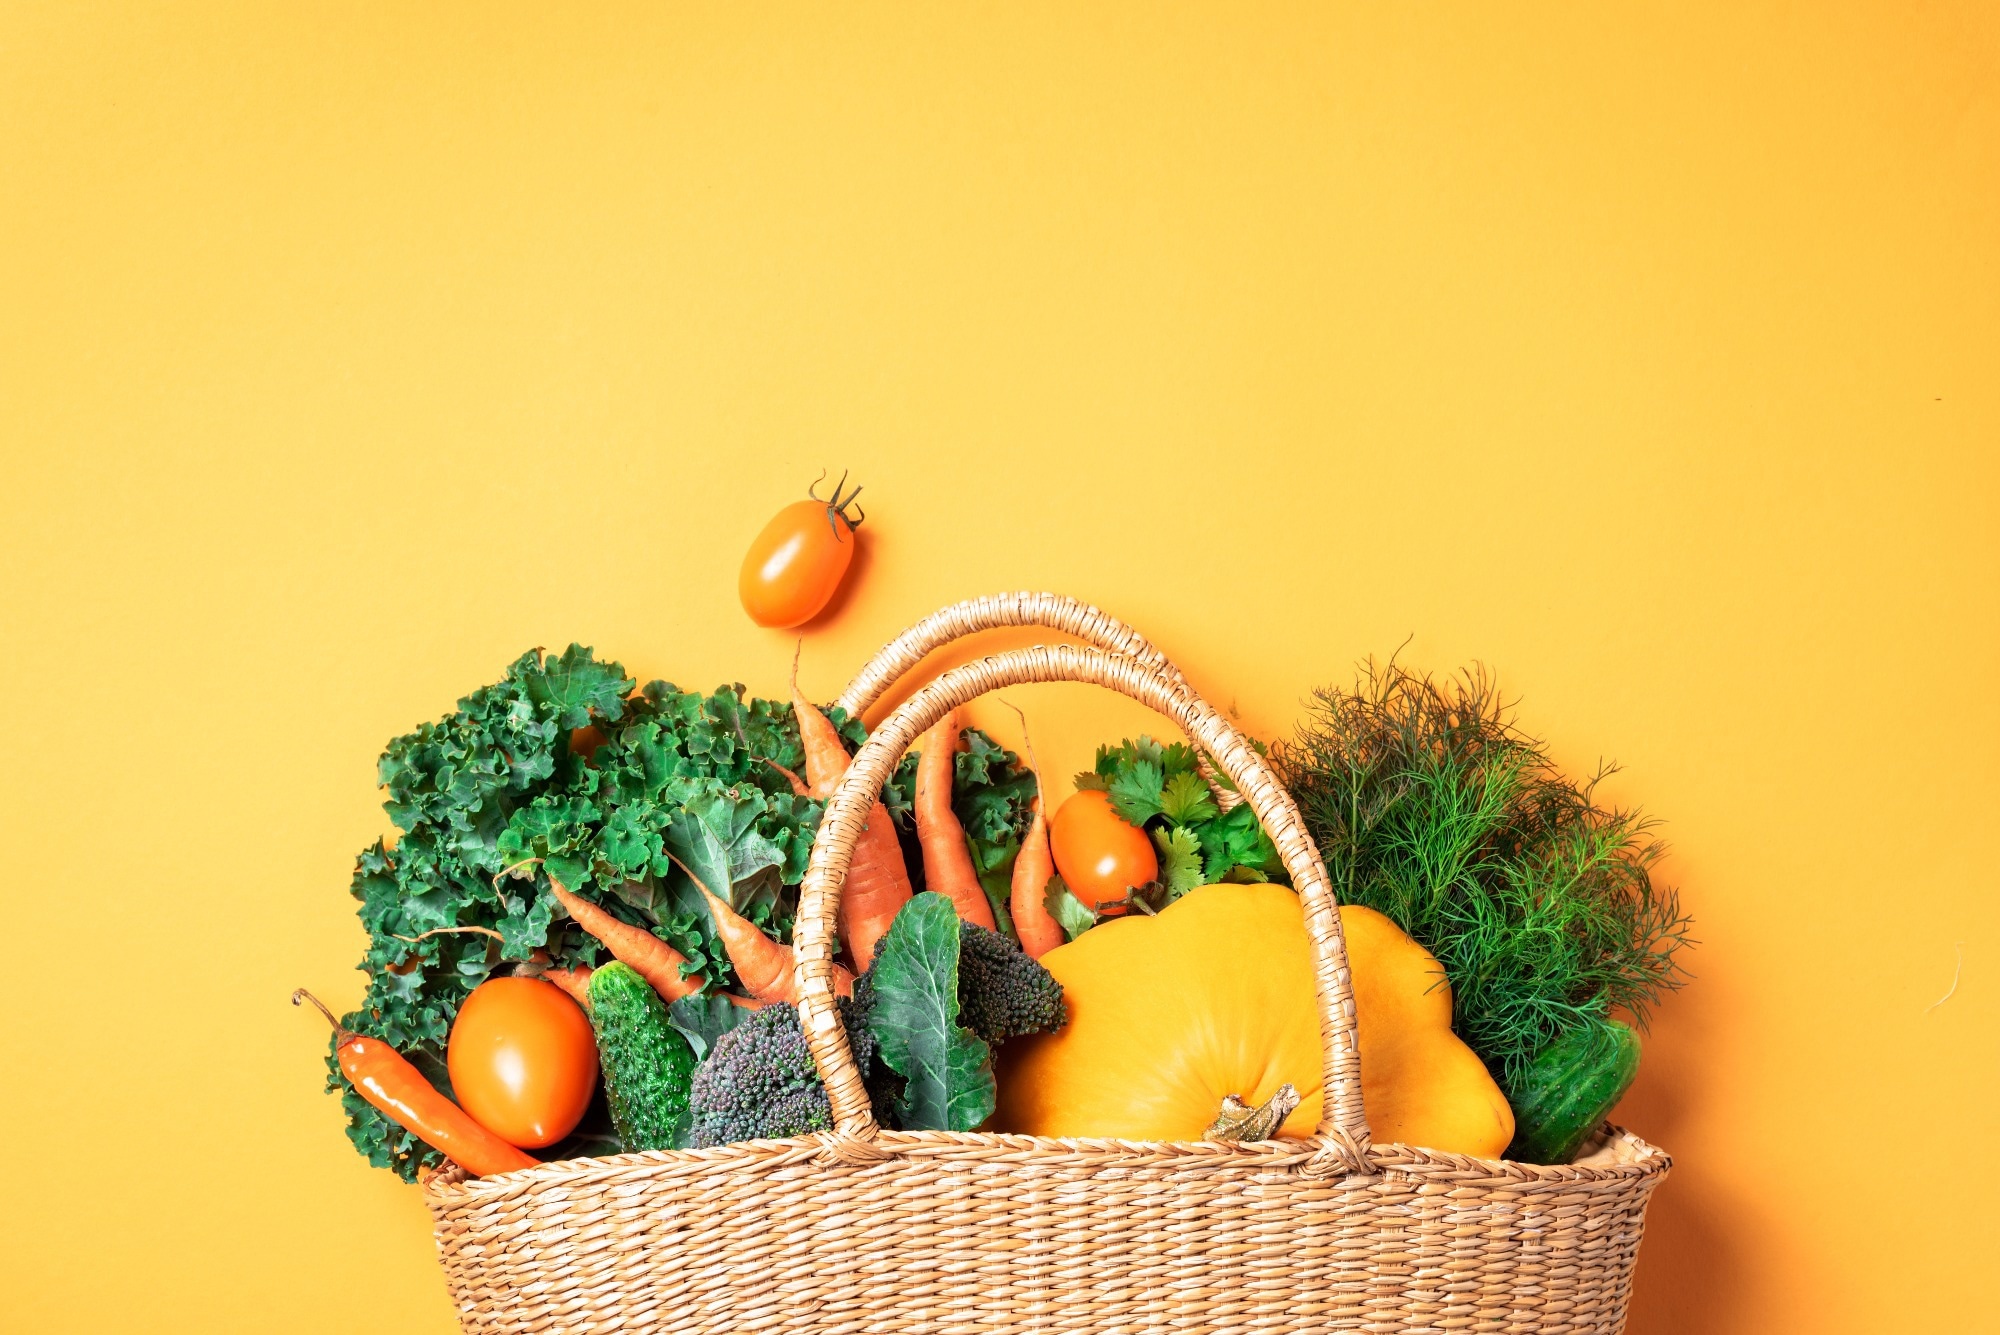 Study: Cross-sectional measurement of adherence to a proposed sustainable and healthy dietary pattern among U.S. adults using the newly developed Planetary Health Diet Index for the United States. Image Credit: j.chizhe Shutterstock